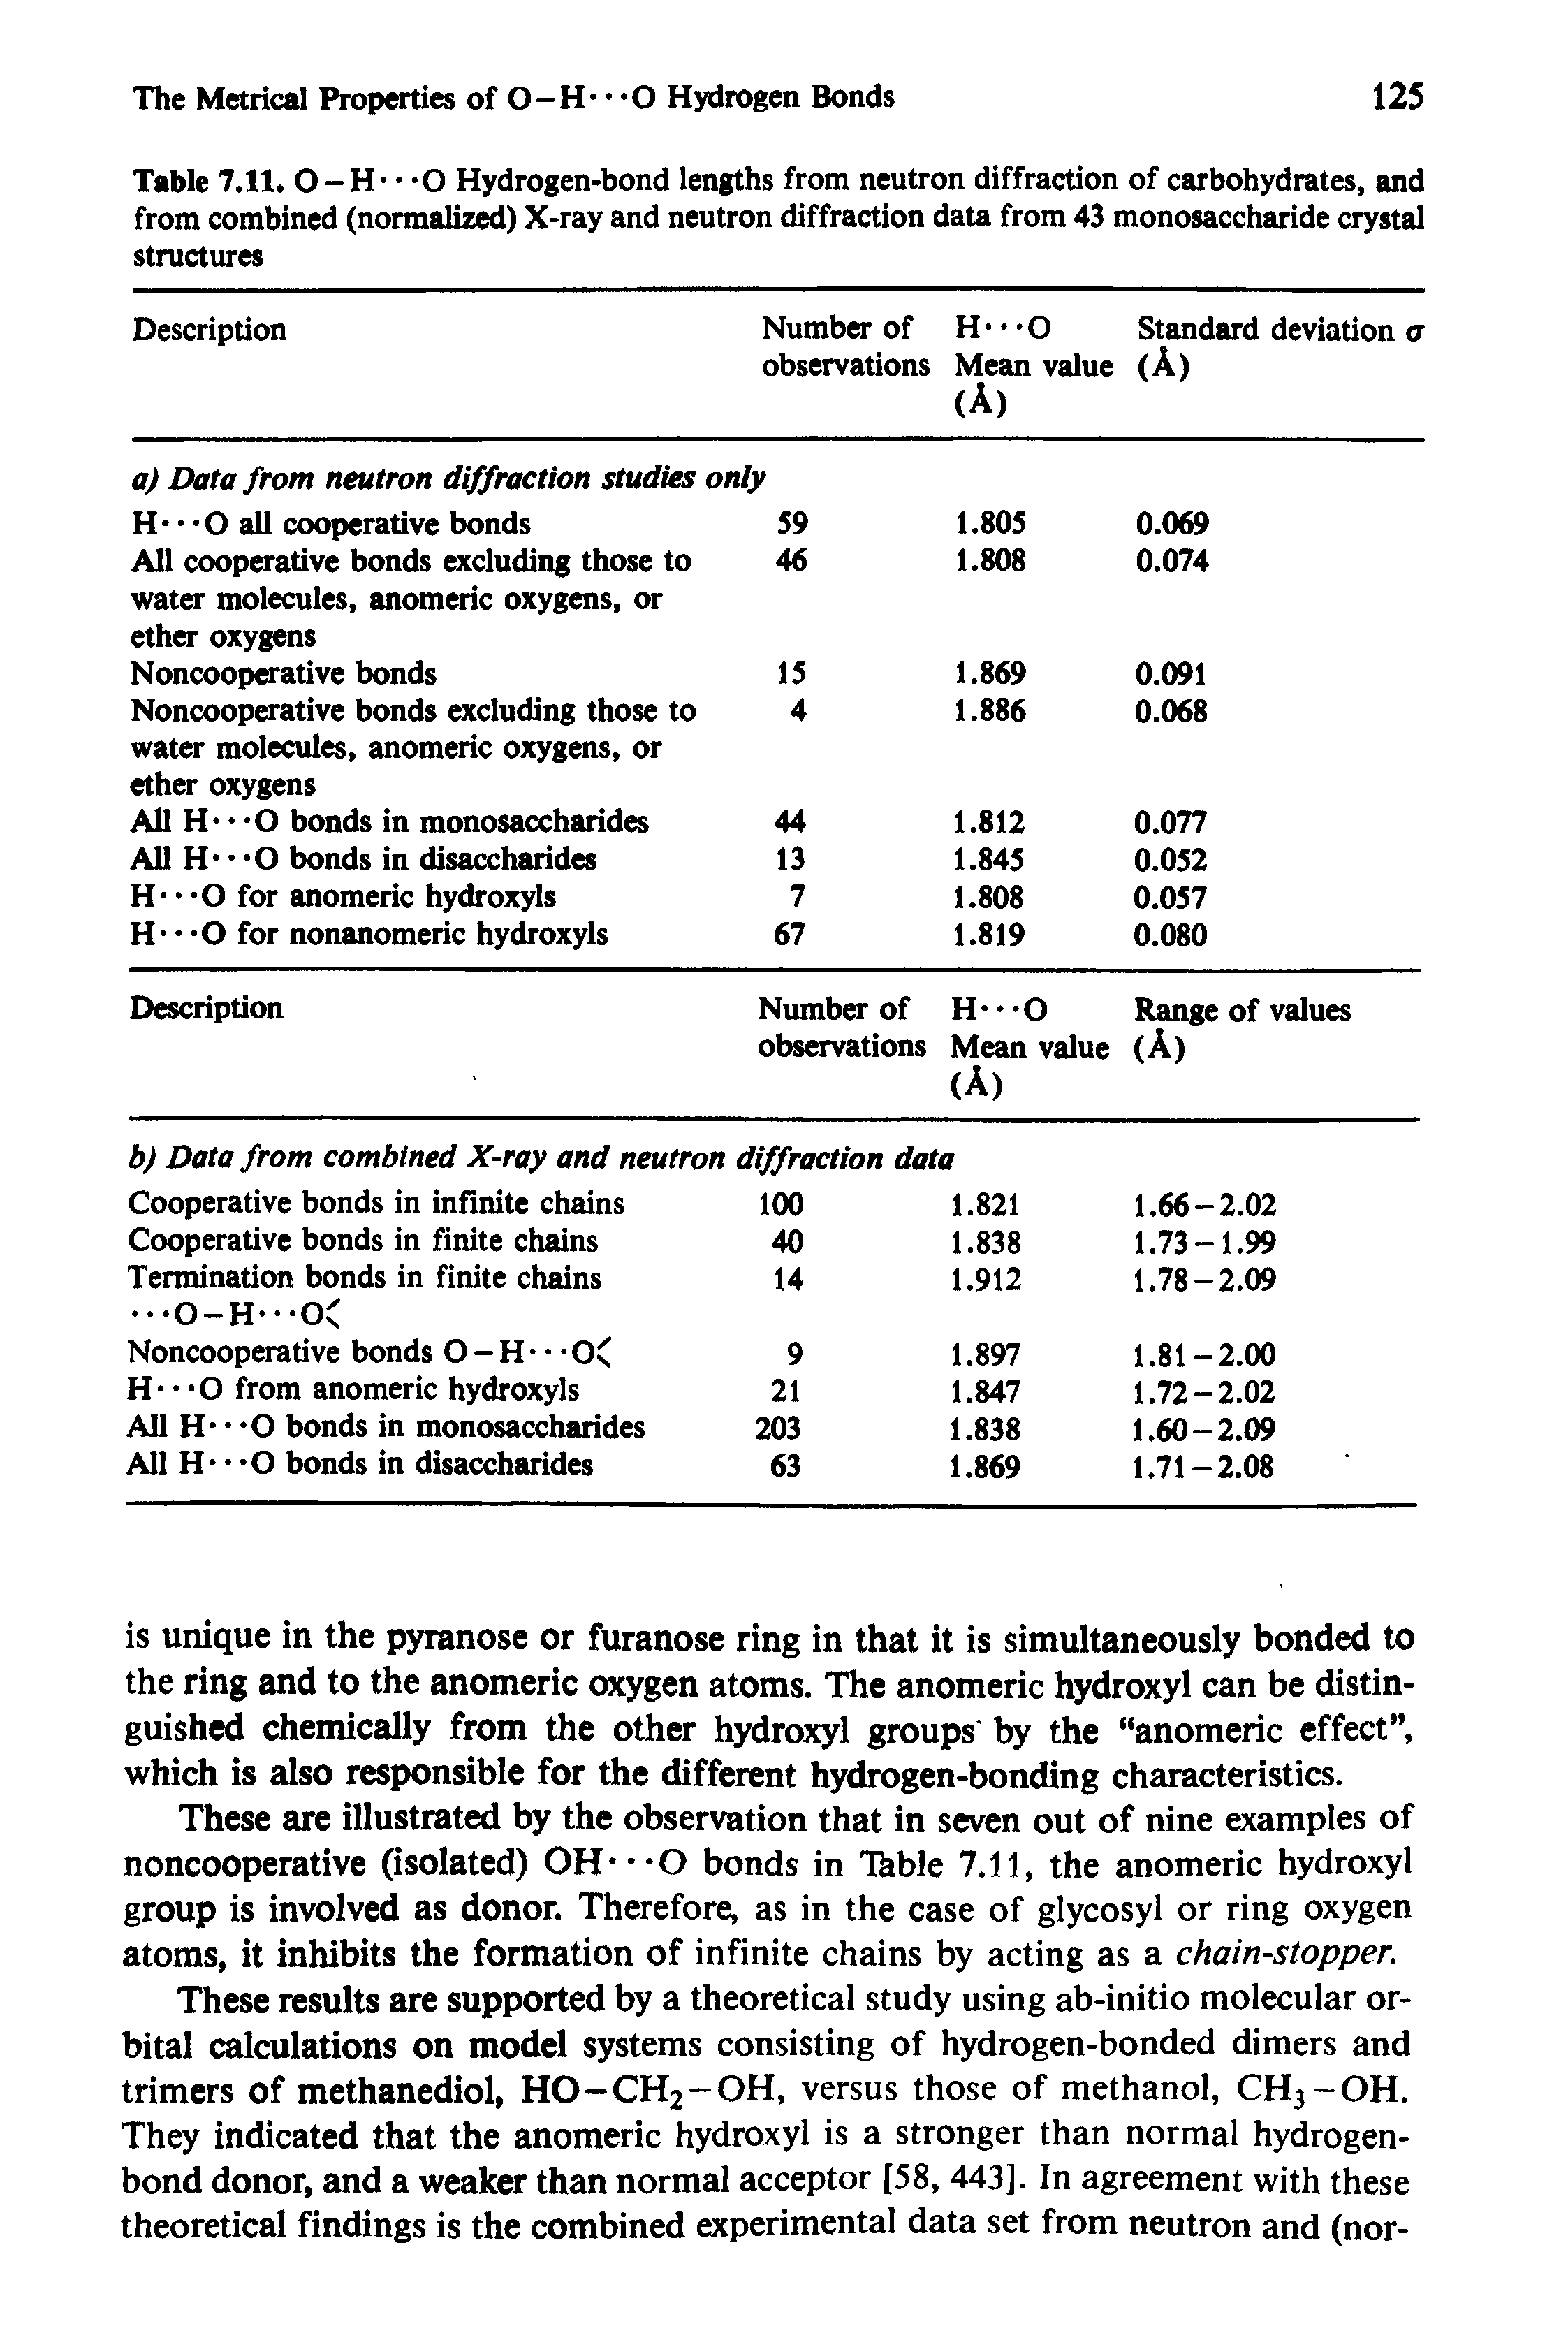 Table 7.11. O-H -O Hydrogen-bond lengths from neutron diffraction of carbohydrates, and from combined (normalized) X-ray and neutron diffraction data from 43 monosaccharide crystal structures...